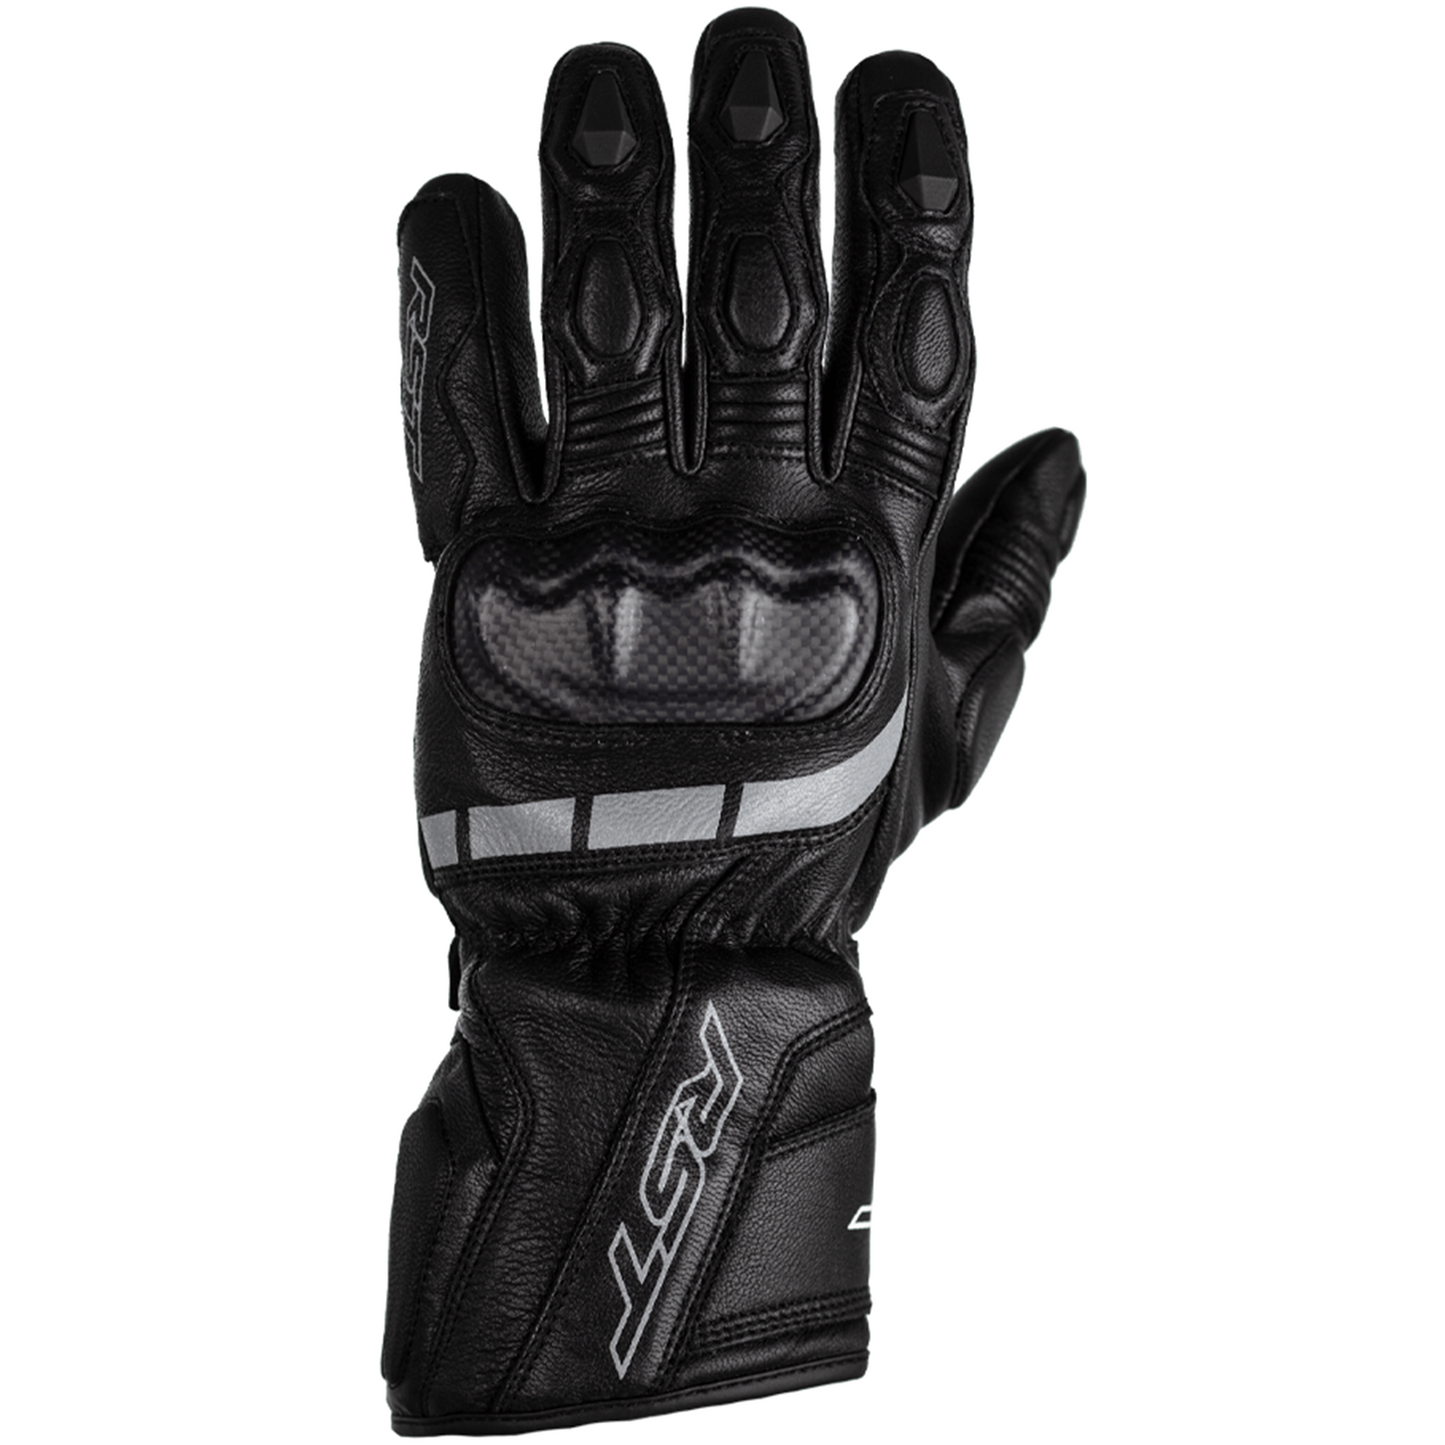 RST Axis Waterproof (CE) Gloves